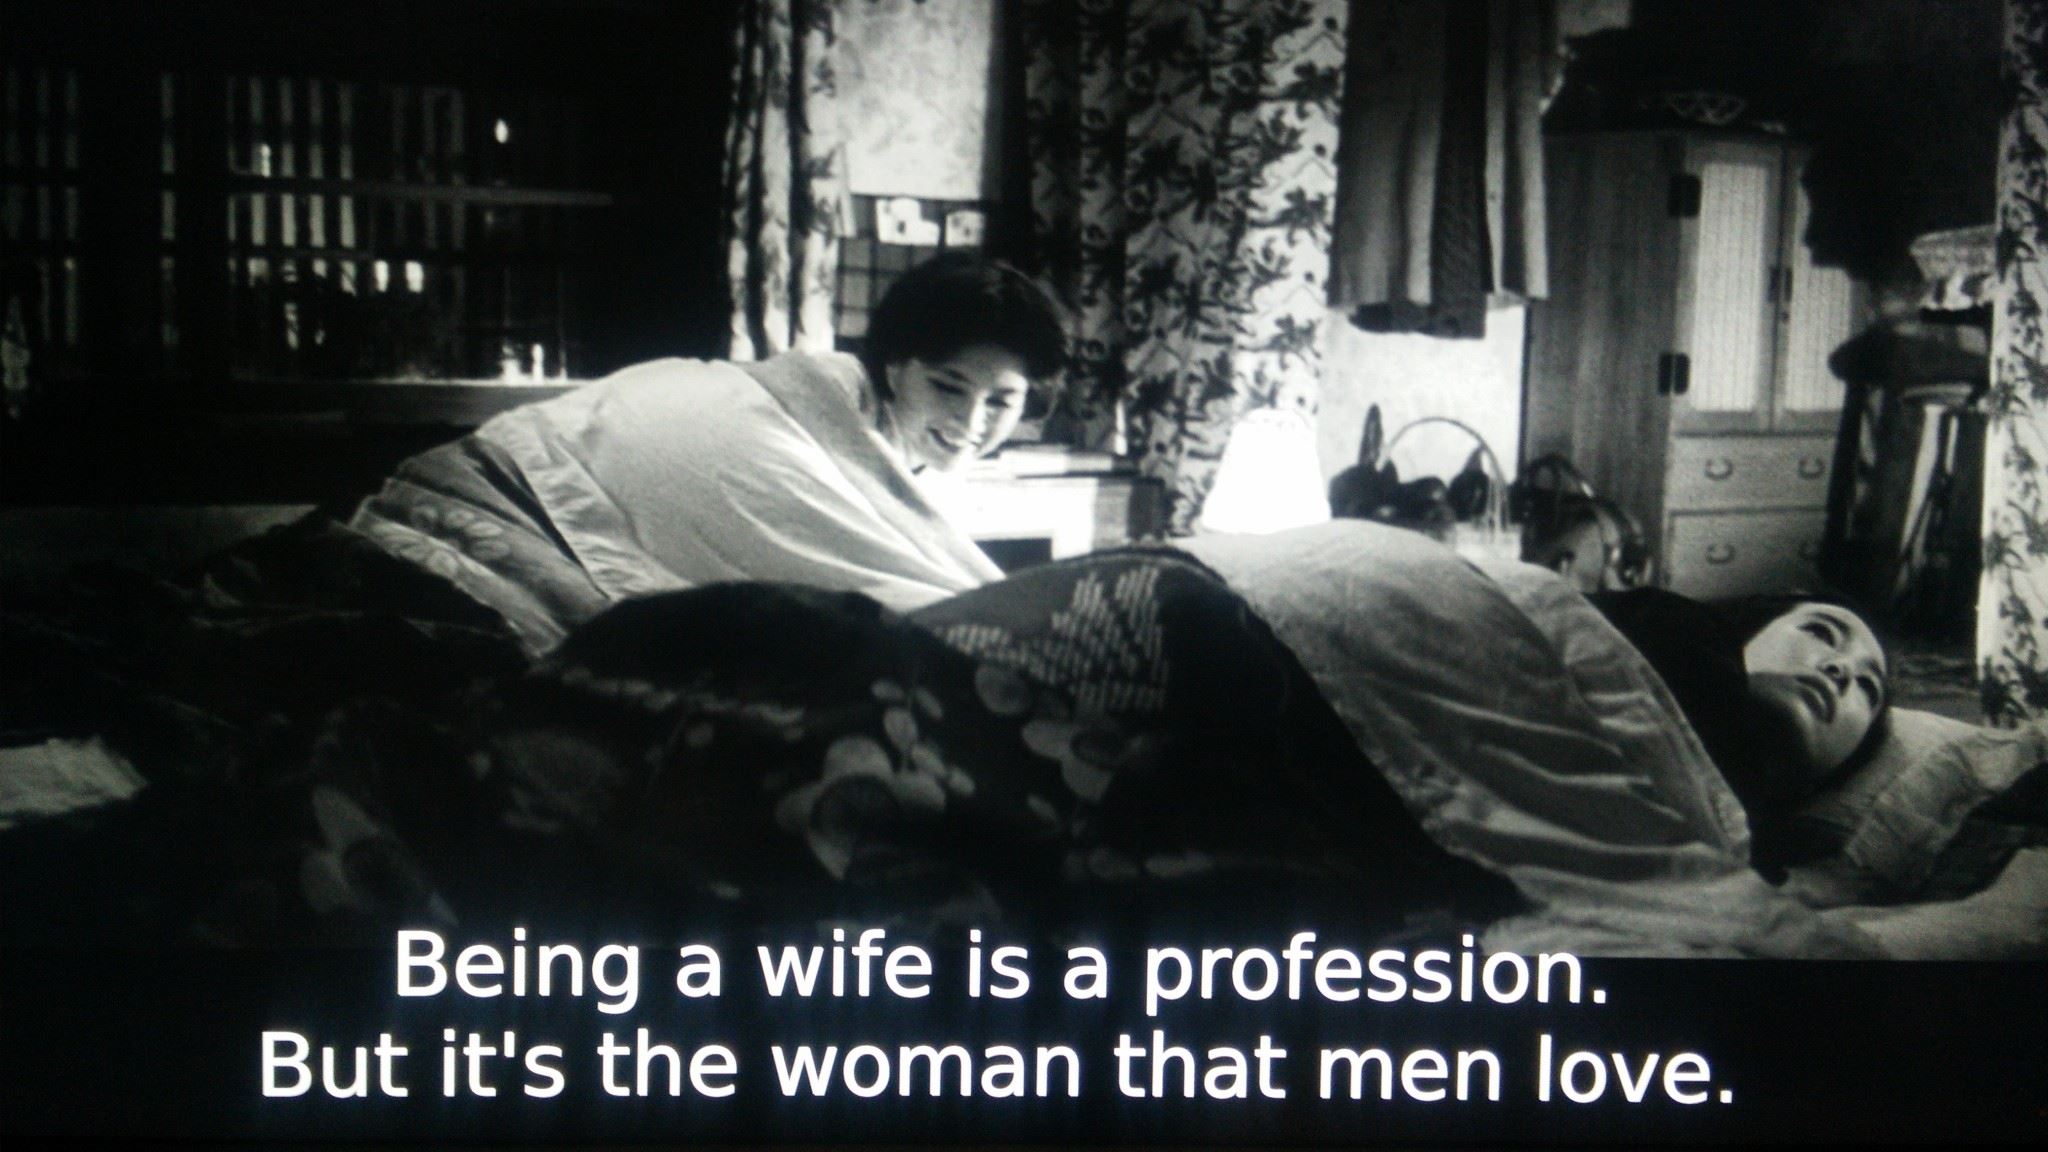 Being a wife is a profession. But it’s the woman than men love. Source: Criterion 

